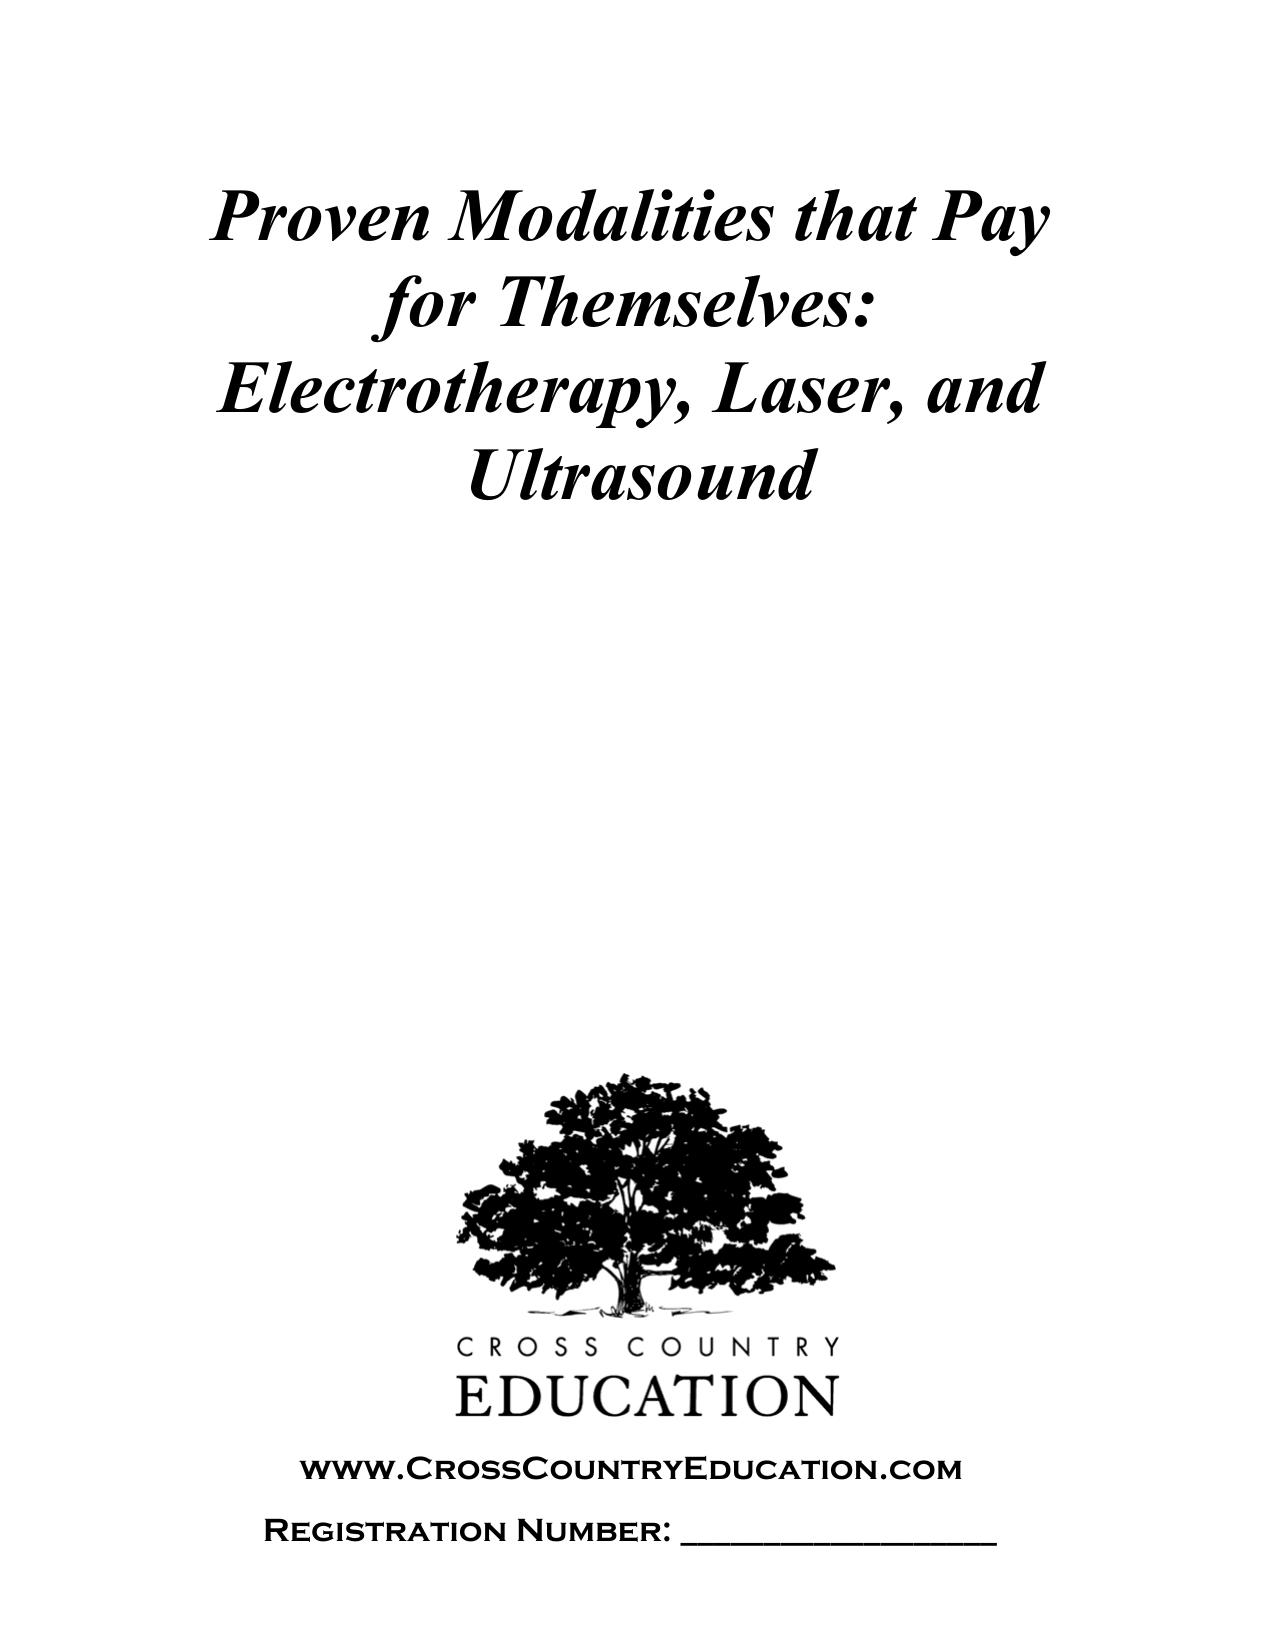 PROVEN MODALITIES Electrotherapy,